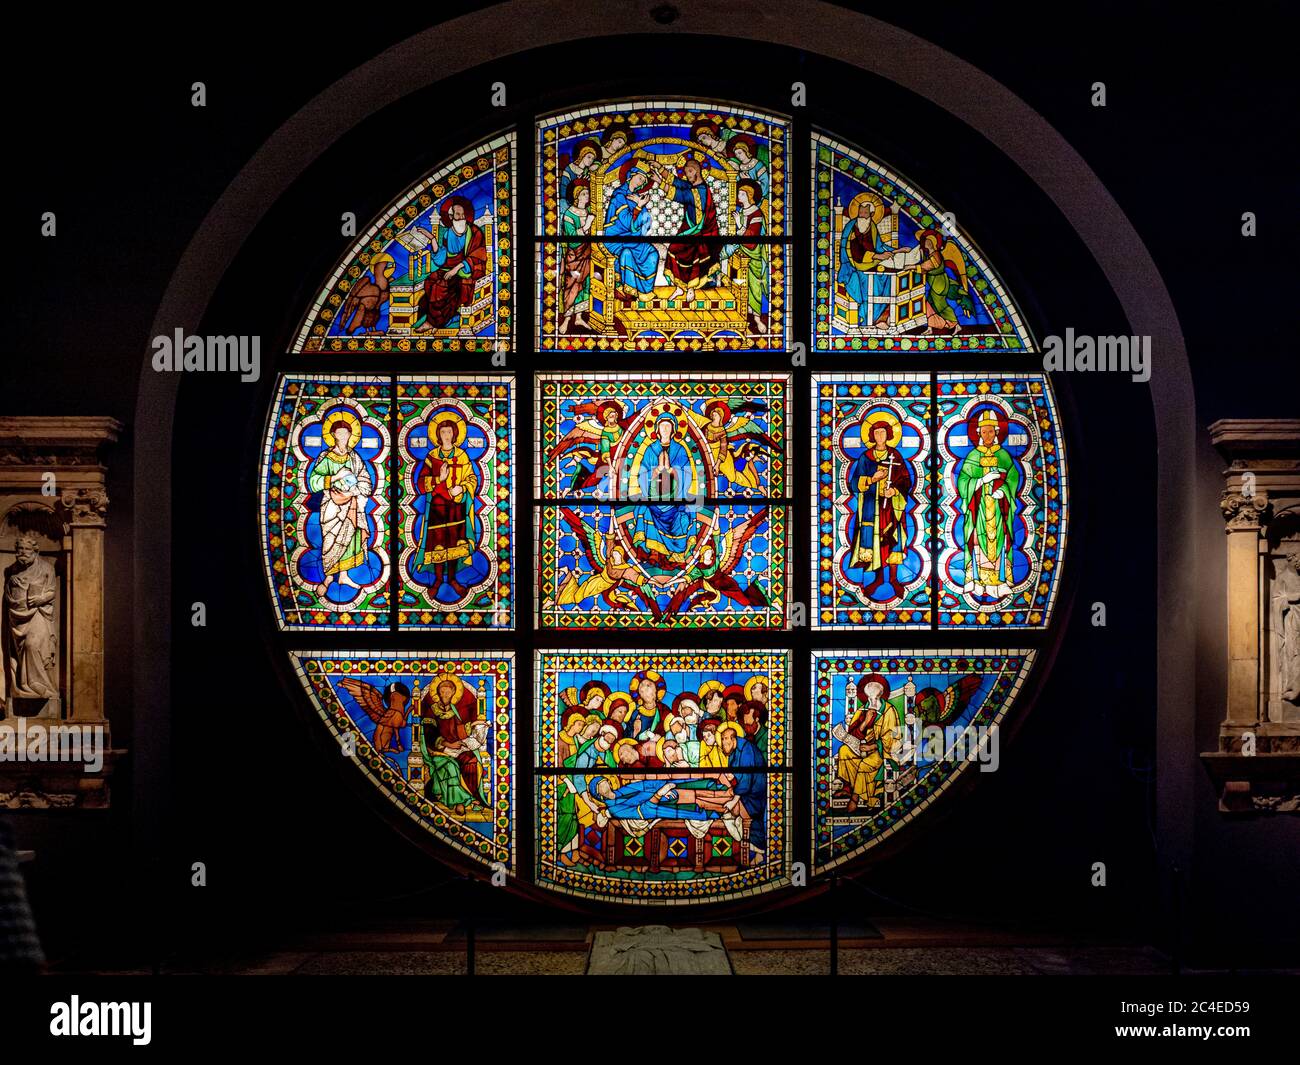 The original Duccio rose window from Siena Cathedral now on display at the Museo dell'Opera del Duomo. Siena, Italy. Stock Photo